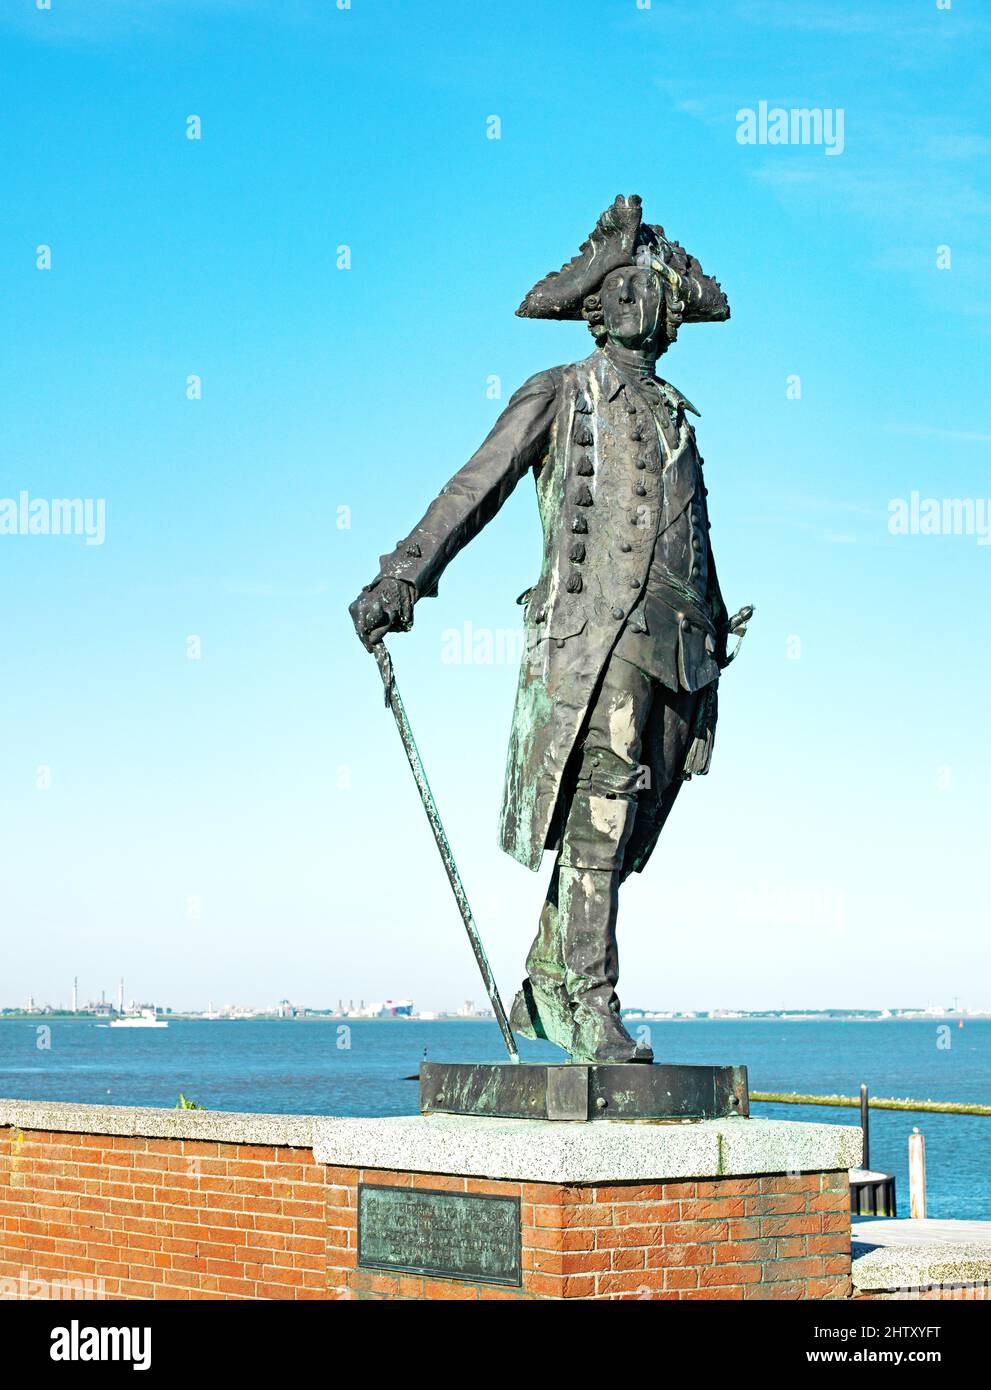 Statue, Frederick II, former King of Prussia, Monument, Schoepfwerk, Knock, Emden, East Frisia, Germany Stock Photo